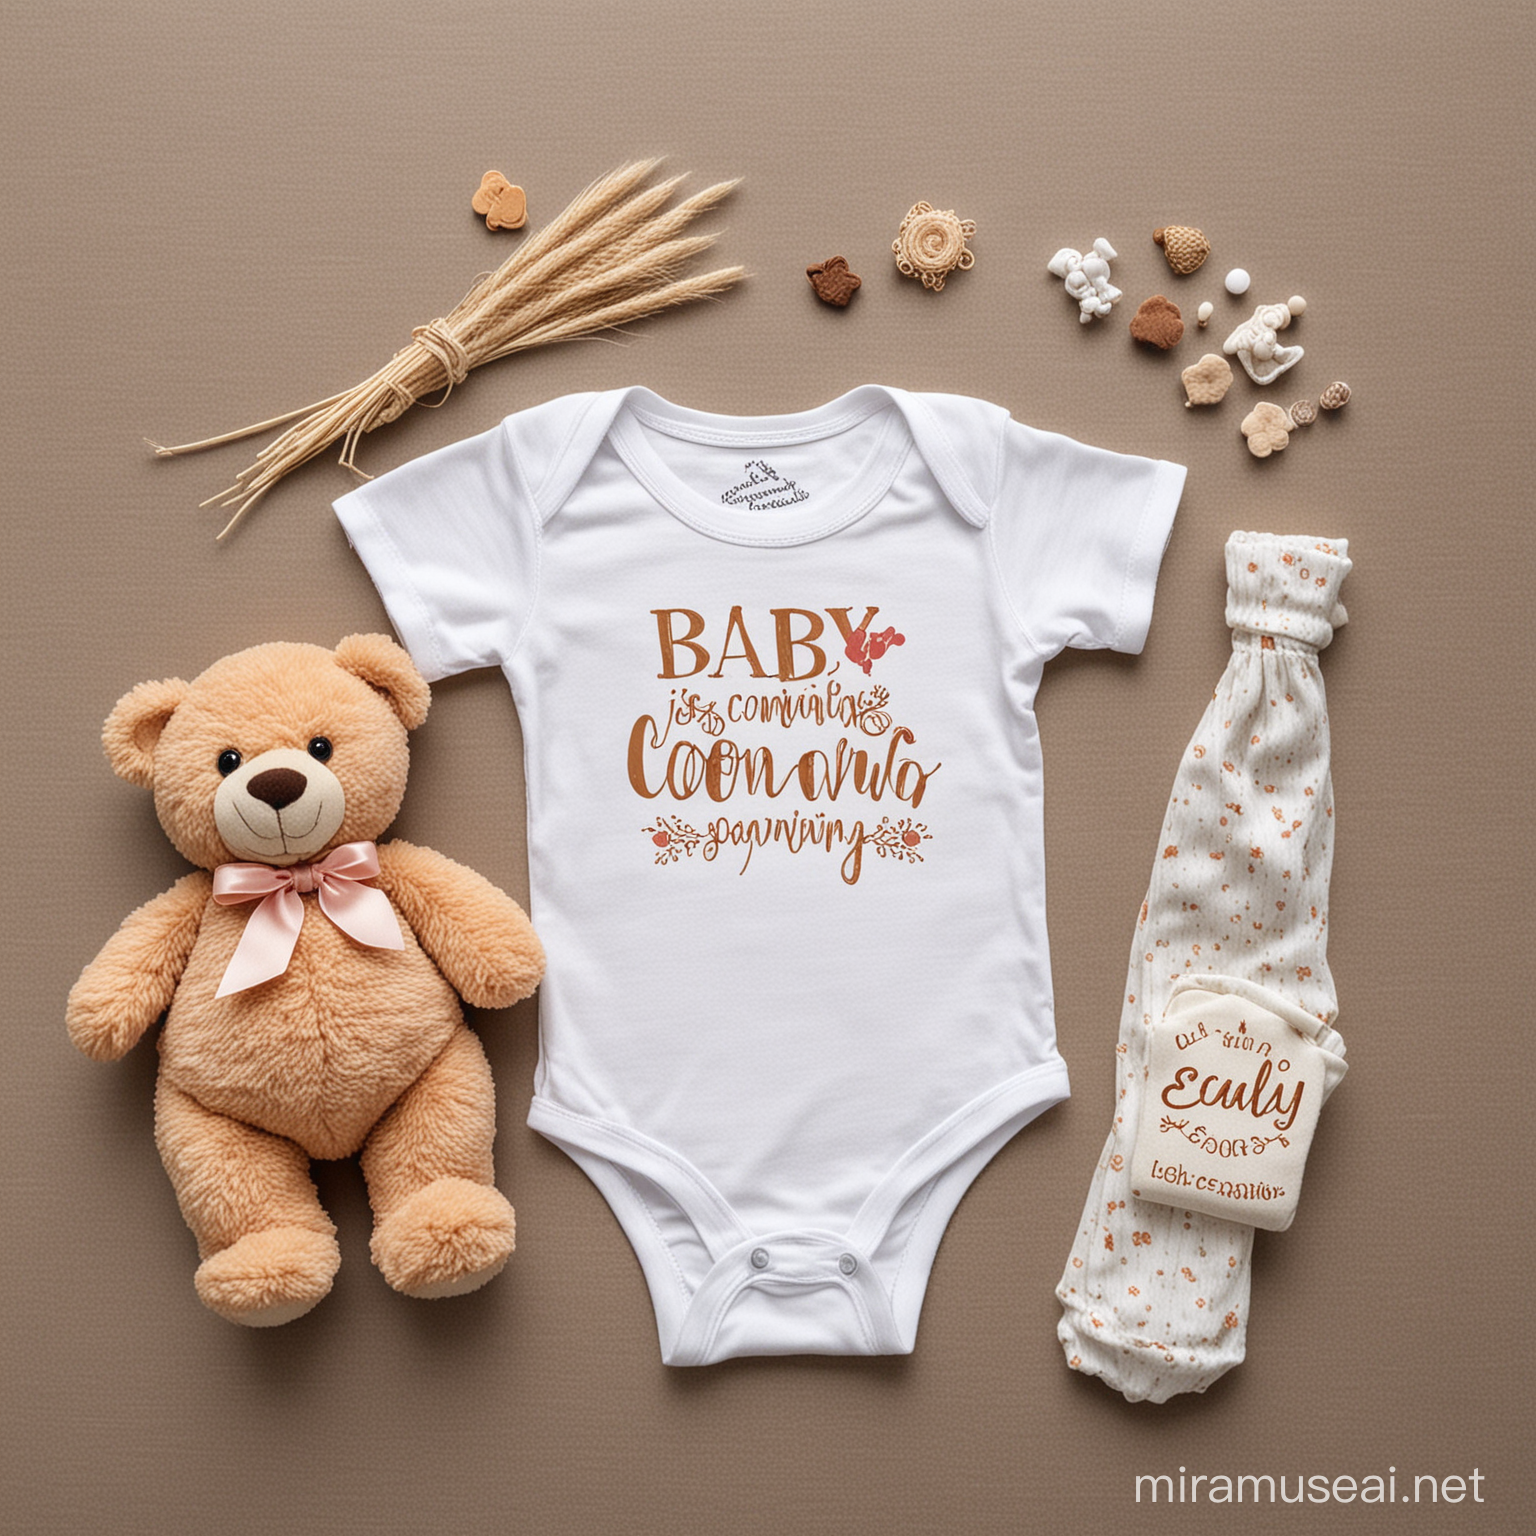 pregnancy announcement 
baby is coming soon 
clothe, teddy bear ,..... elements 
